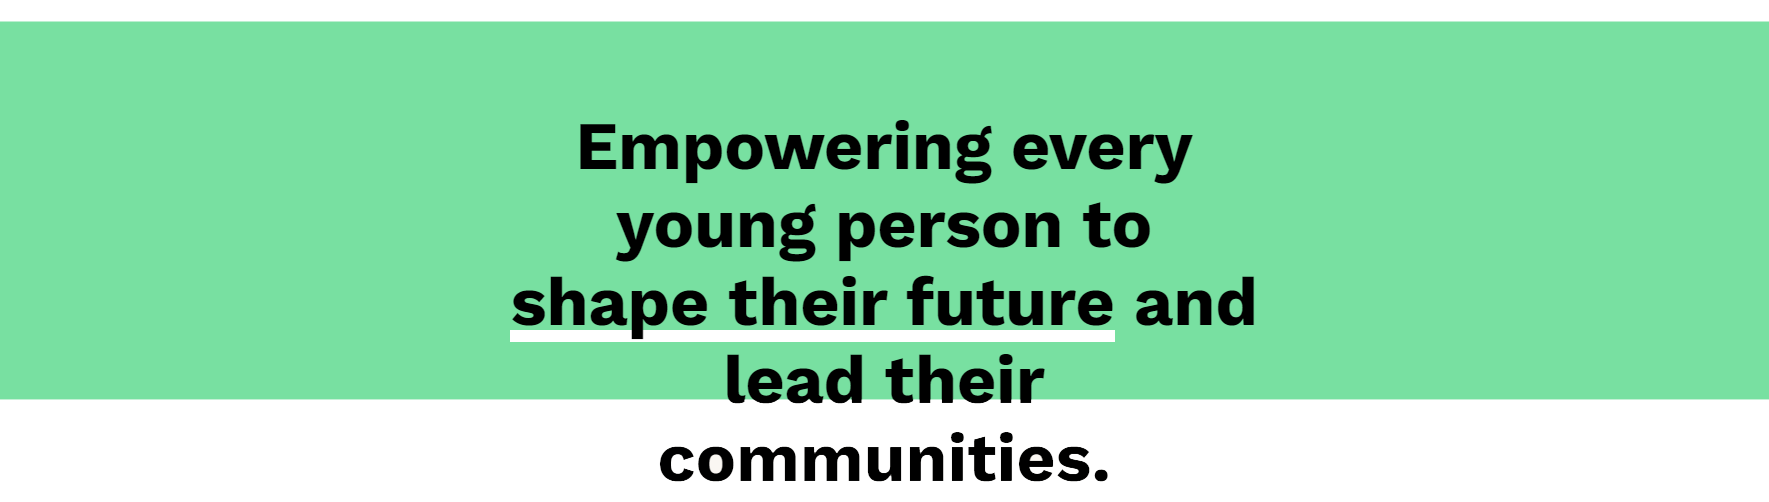 Leadership Skills Foundation Graphic "Empowering every young person to shape their future and lead their communities"